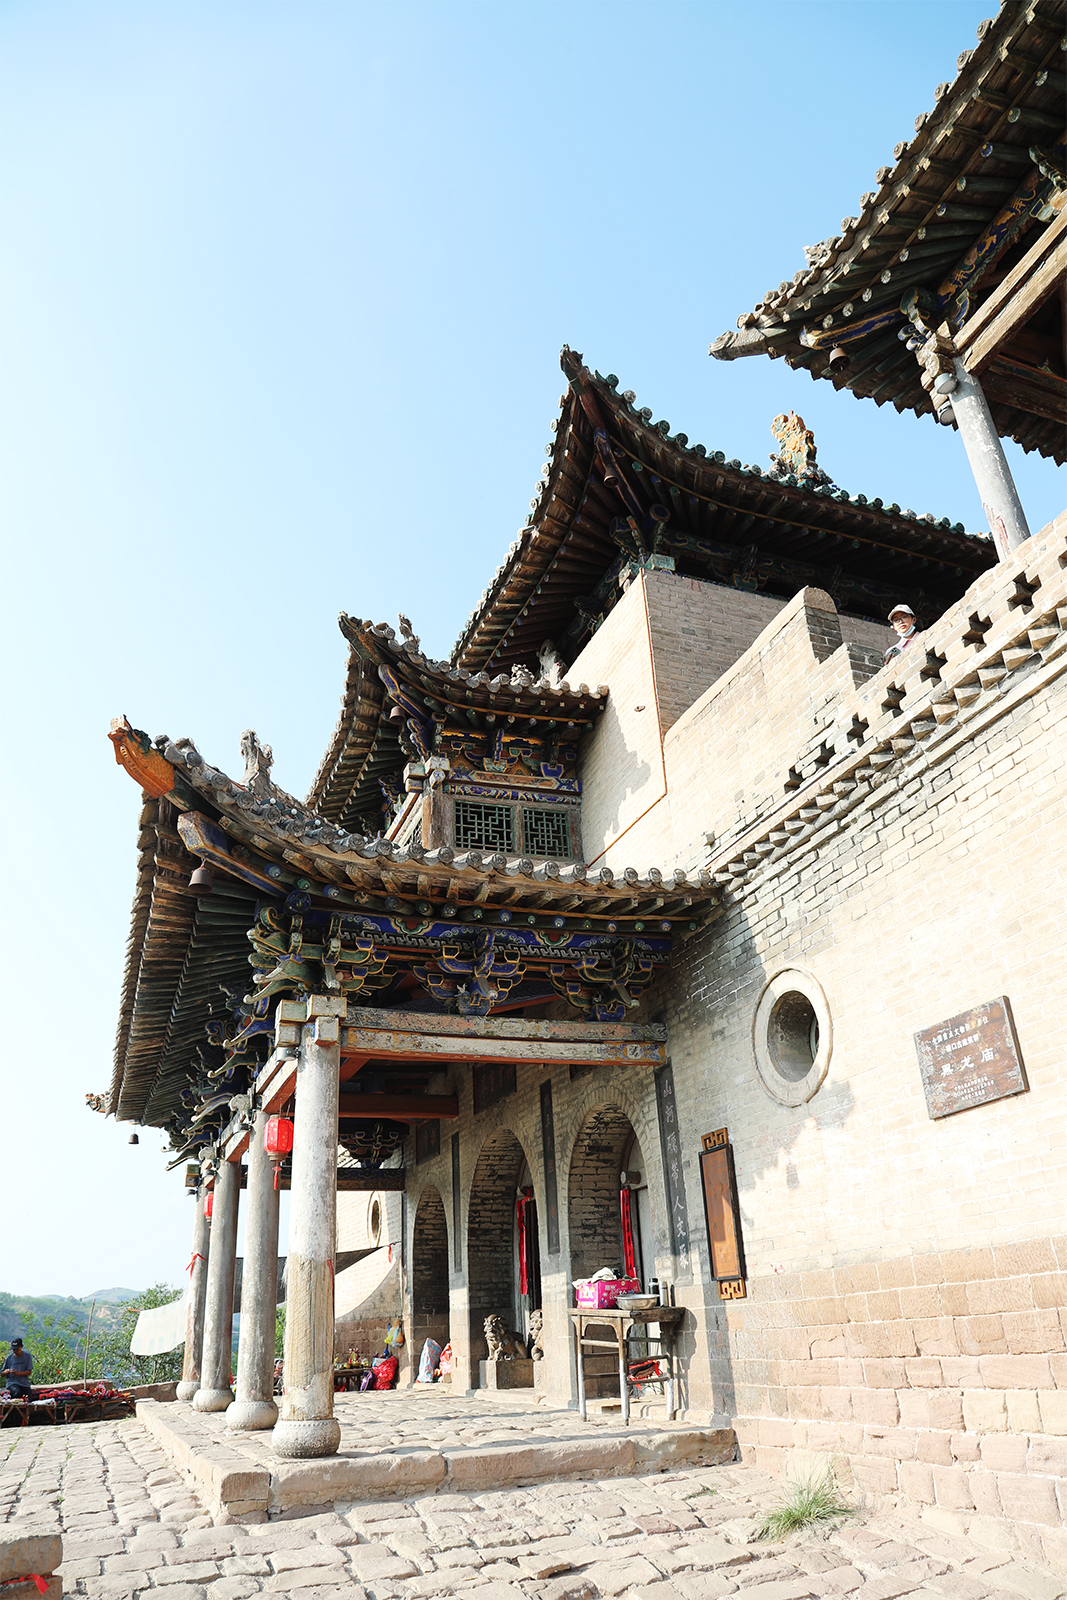 The Black Dragon Temple located on a hill is a landmark of Qikou Ancient Town in Lvliang, Shanxi Province. /CGTN